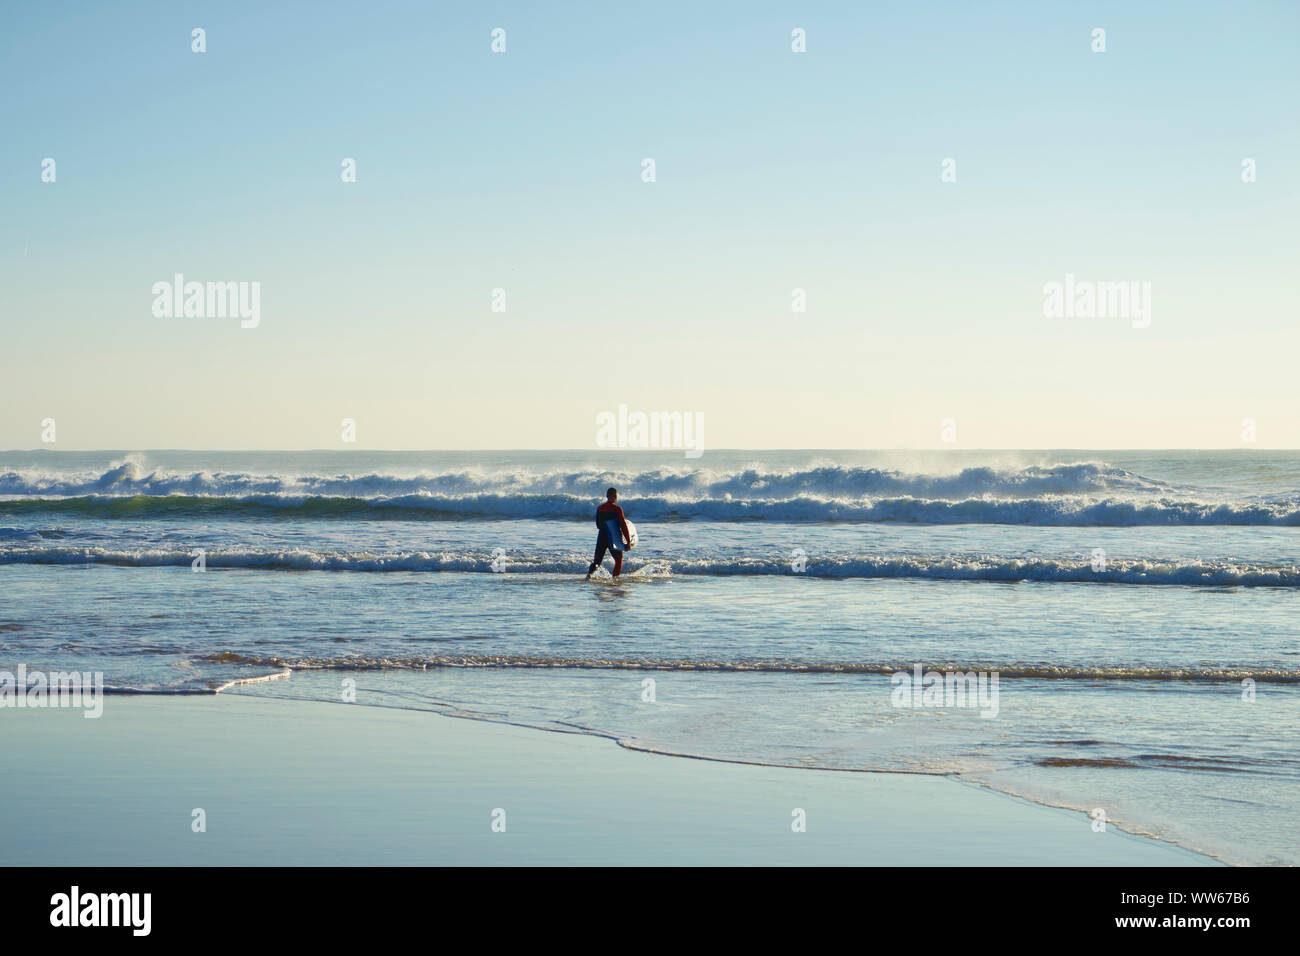 Man carrying surfboard in the sea, waves Stock Photo